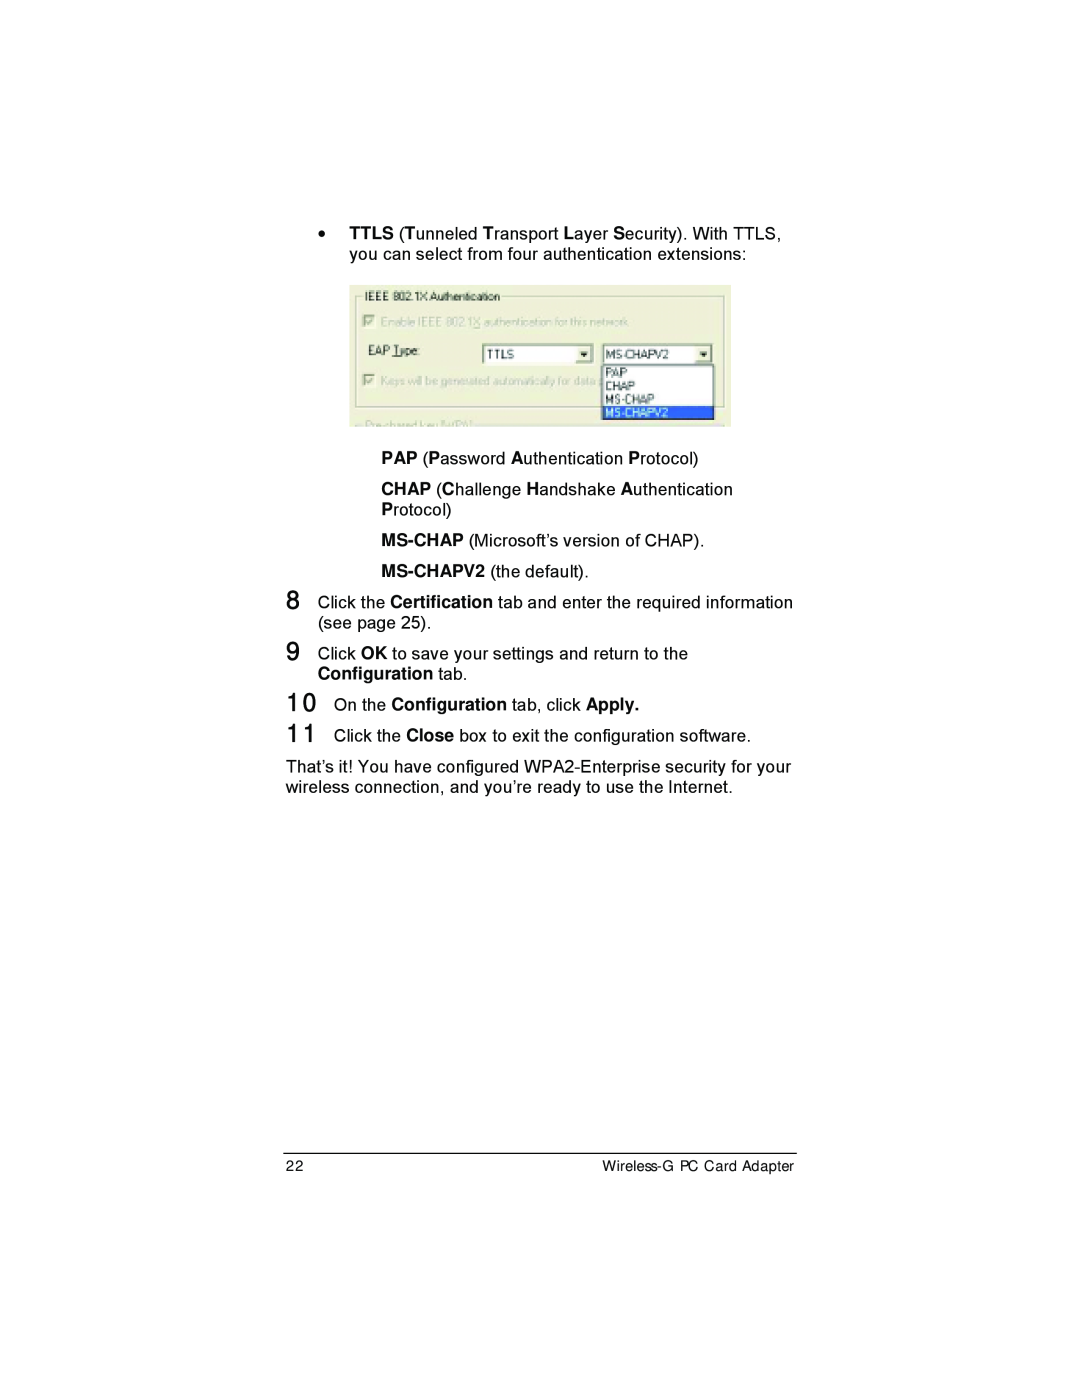 Zoom 4412A/TF manual On the Configuration tab, click Apply 